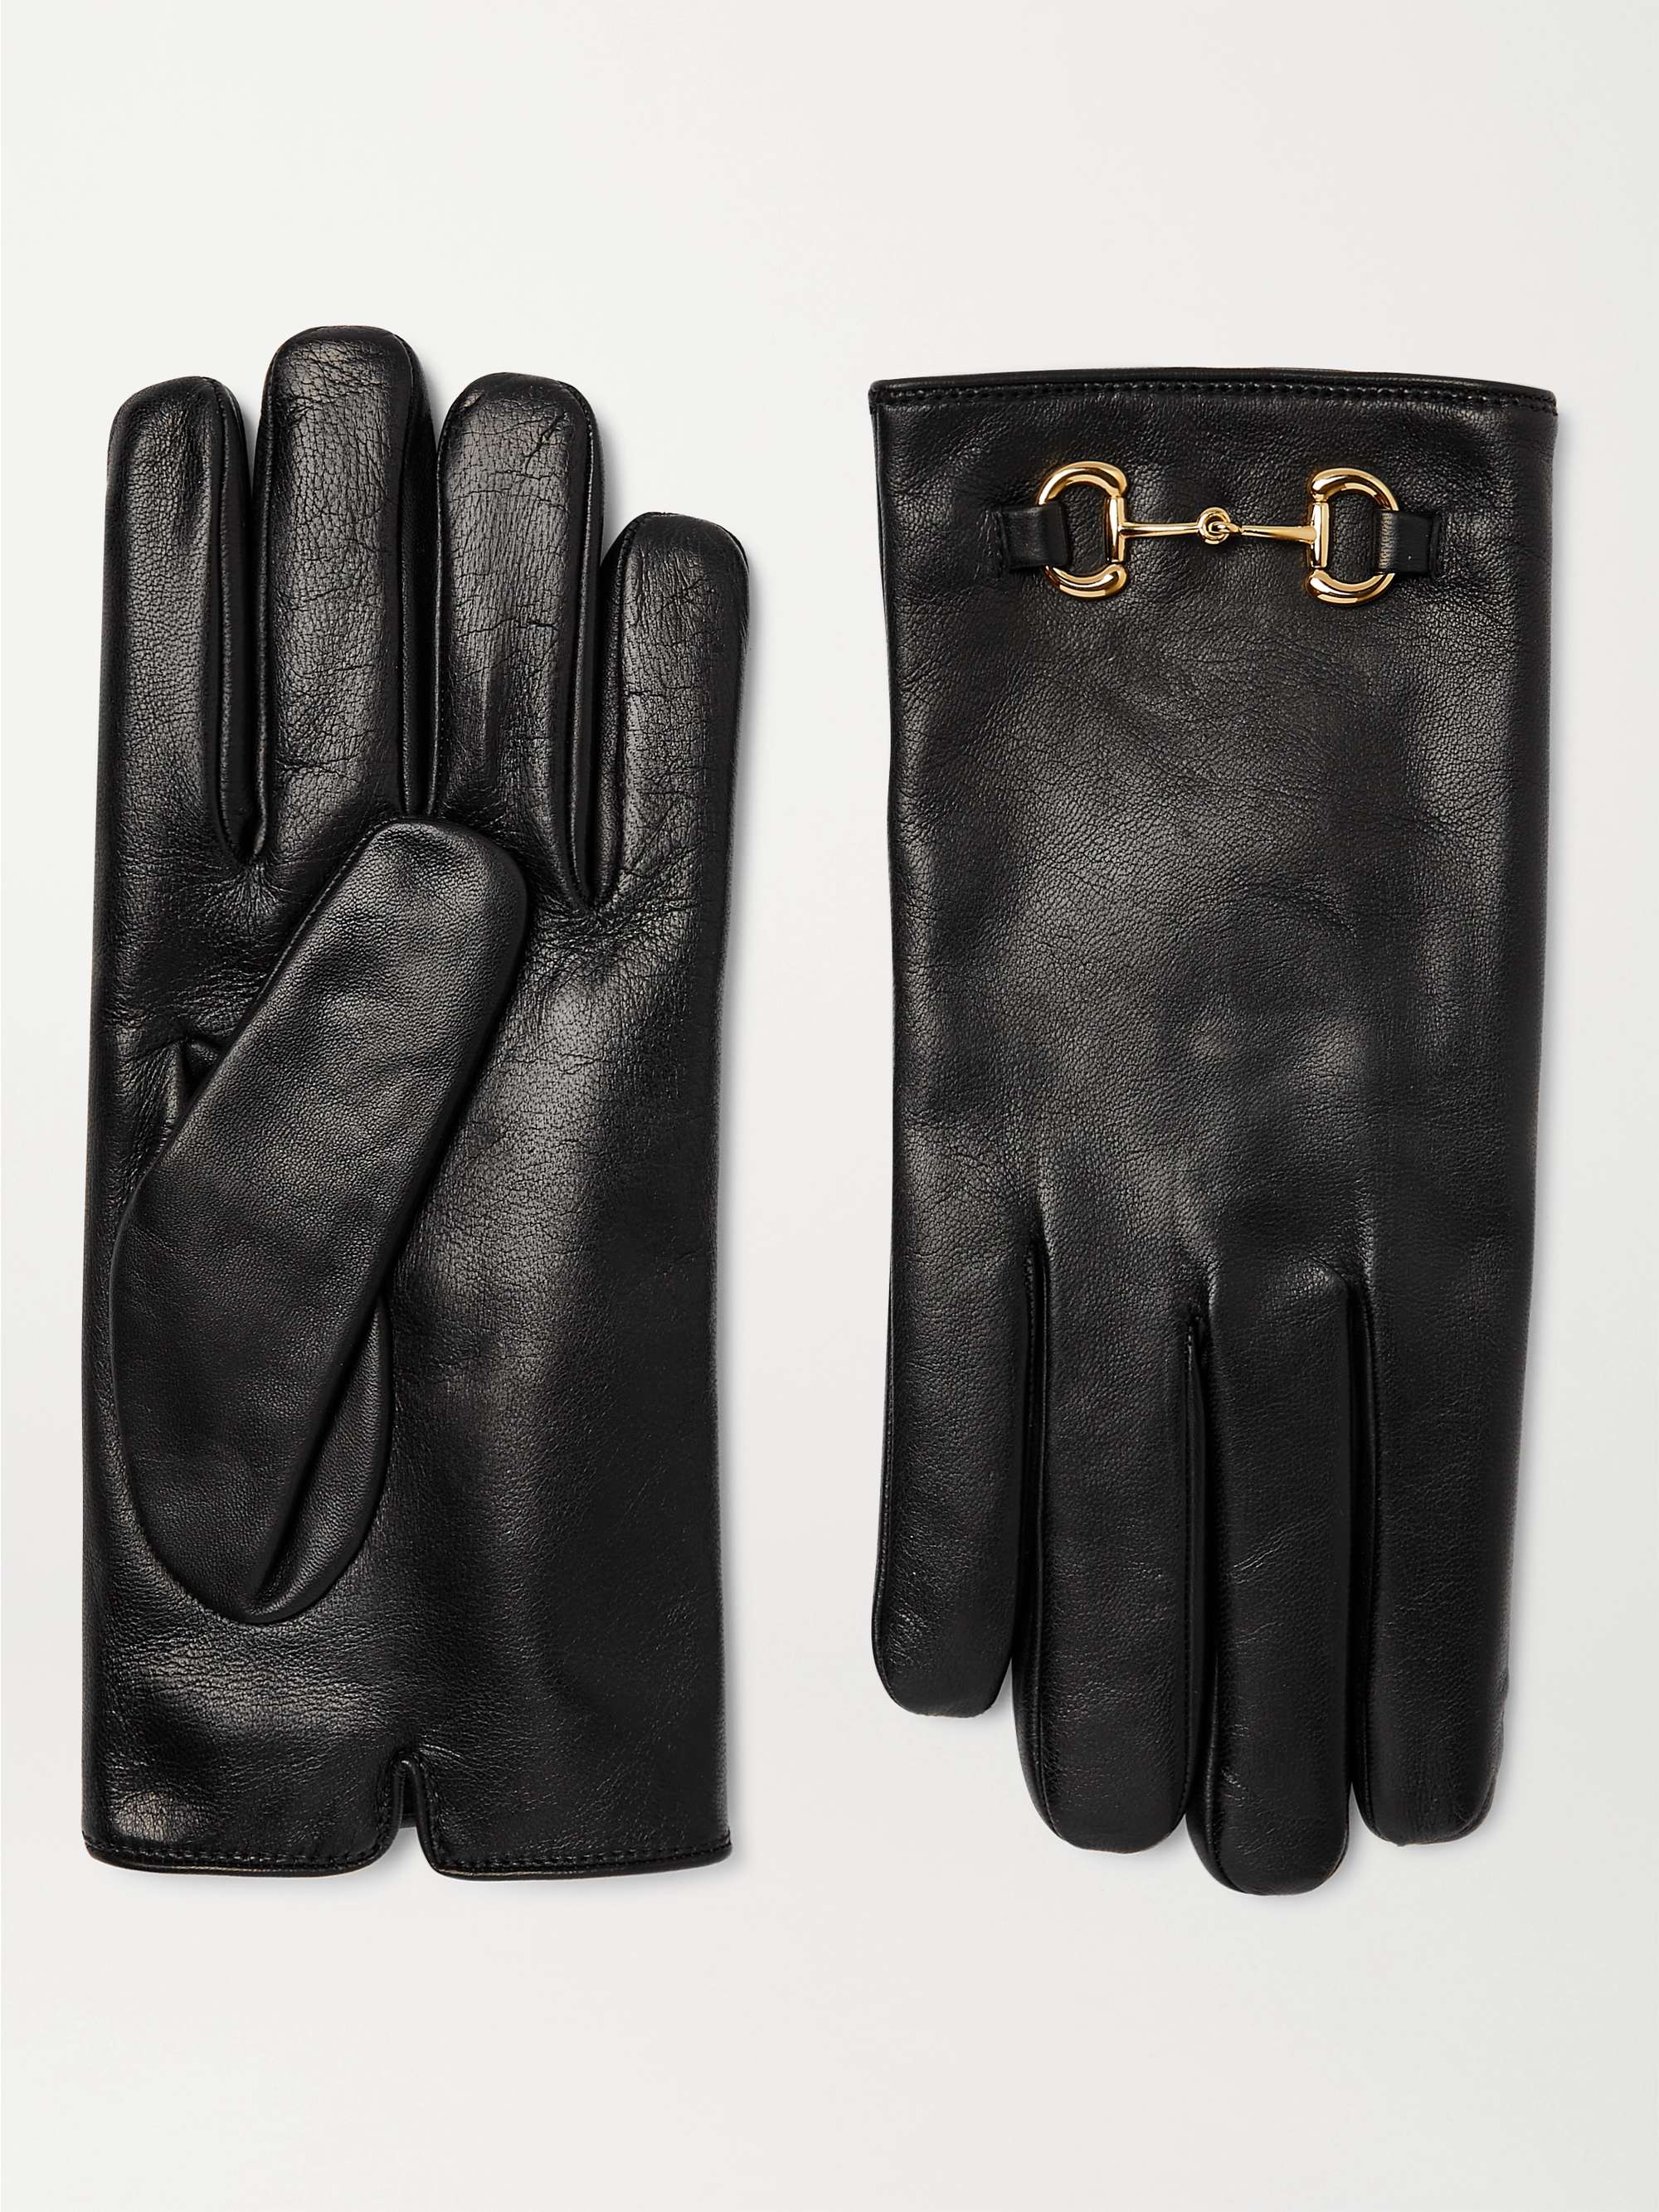 GUCCI Horsebit Cashmere-Lined Leather Gloves